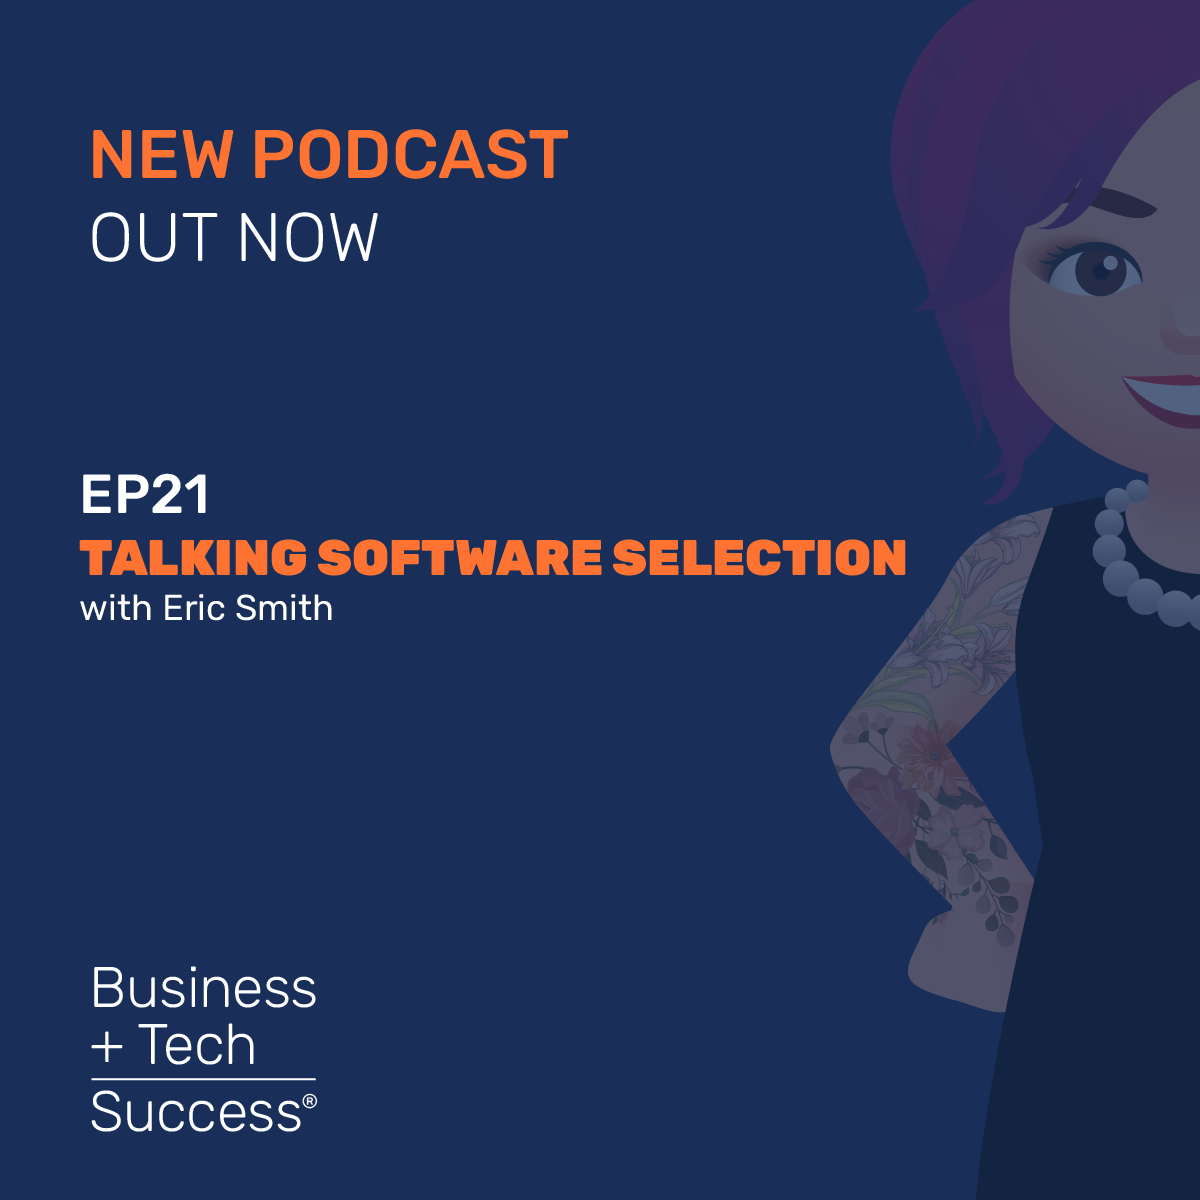 Talking Software Selection with Eric Smith